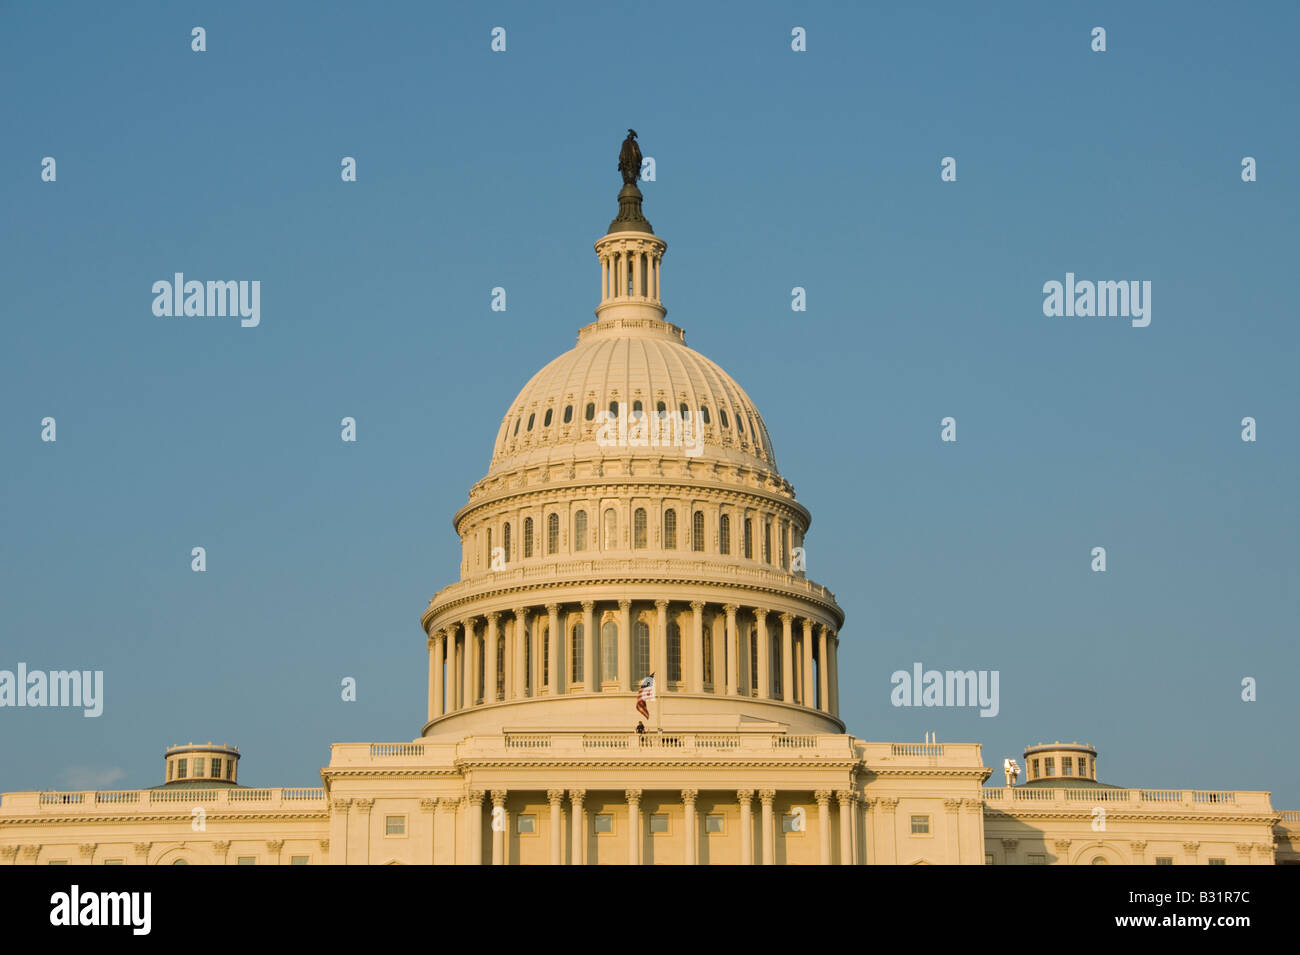 The dome of the US Capitol Building, legislative branch of the US government, seen in golden afternoon light, in Washington, DC. Stock Photo